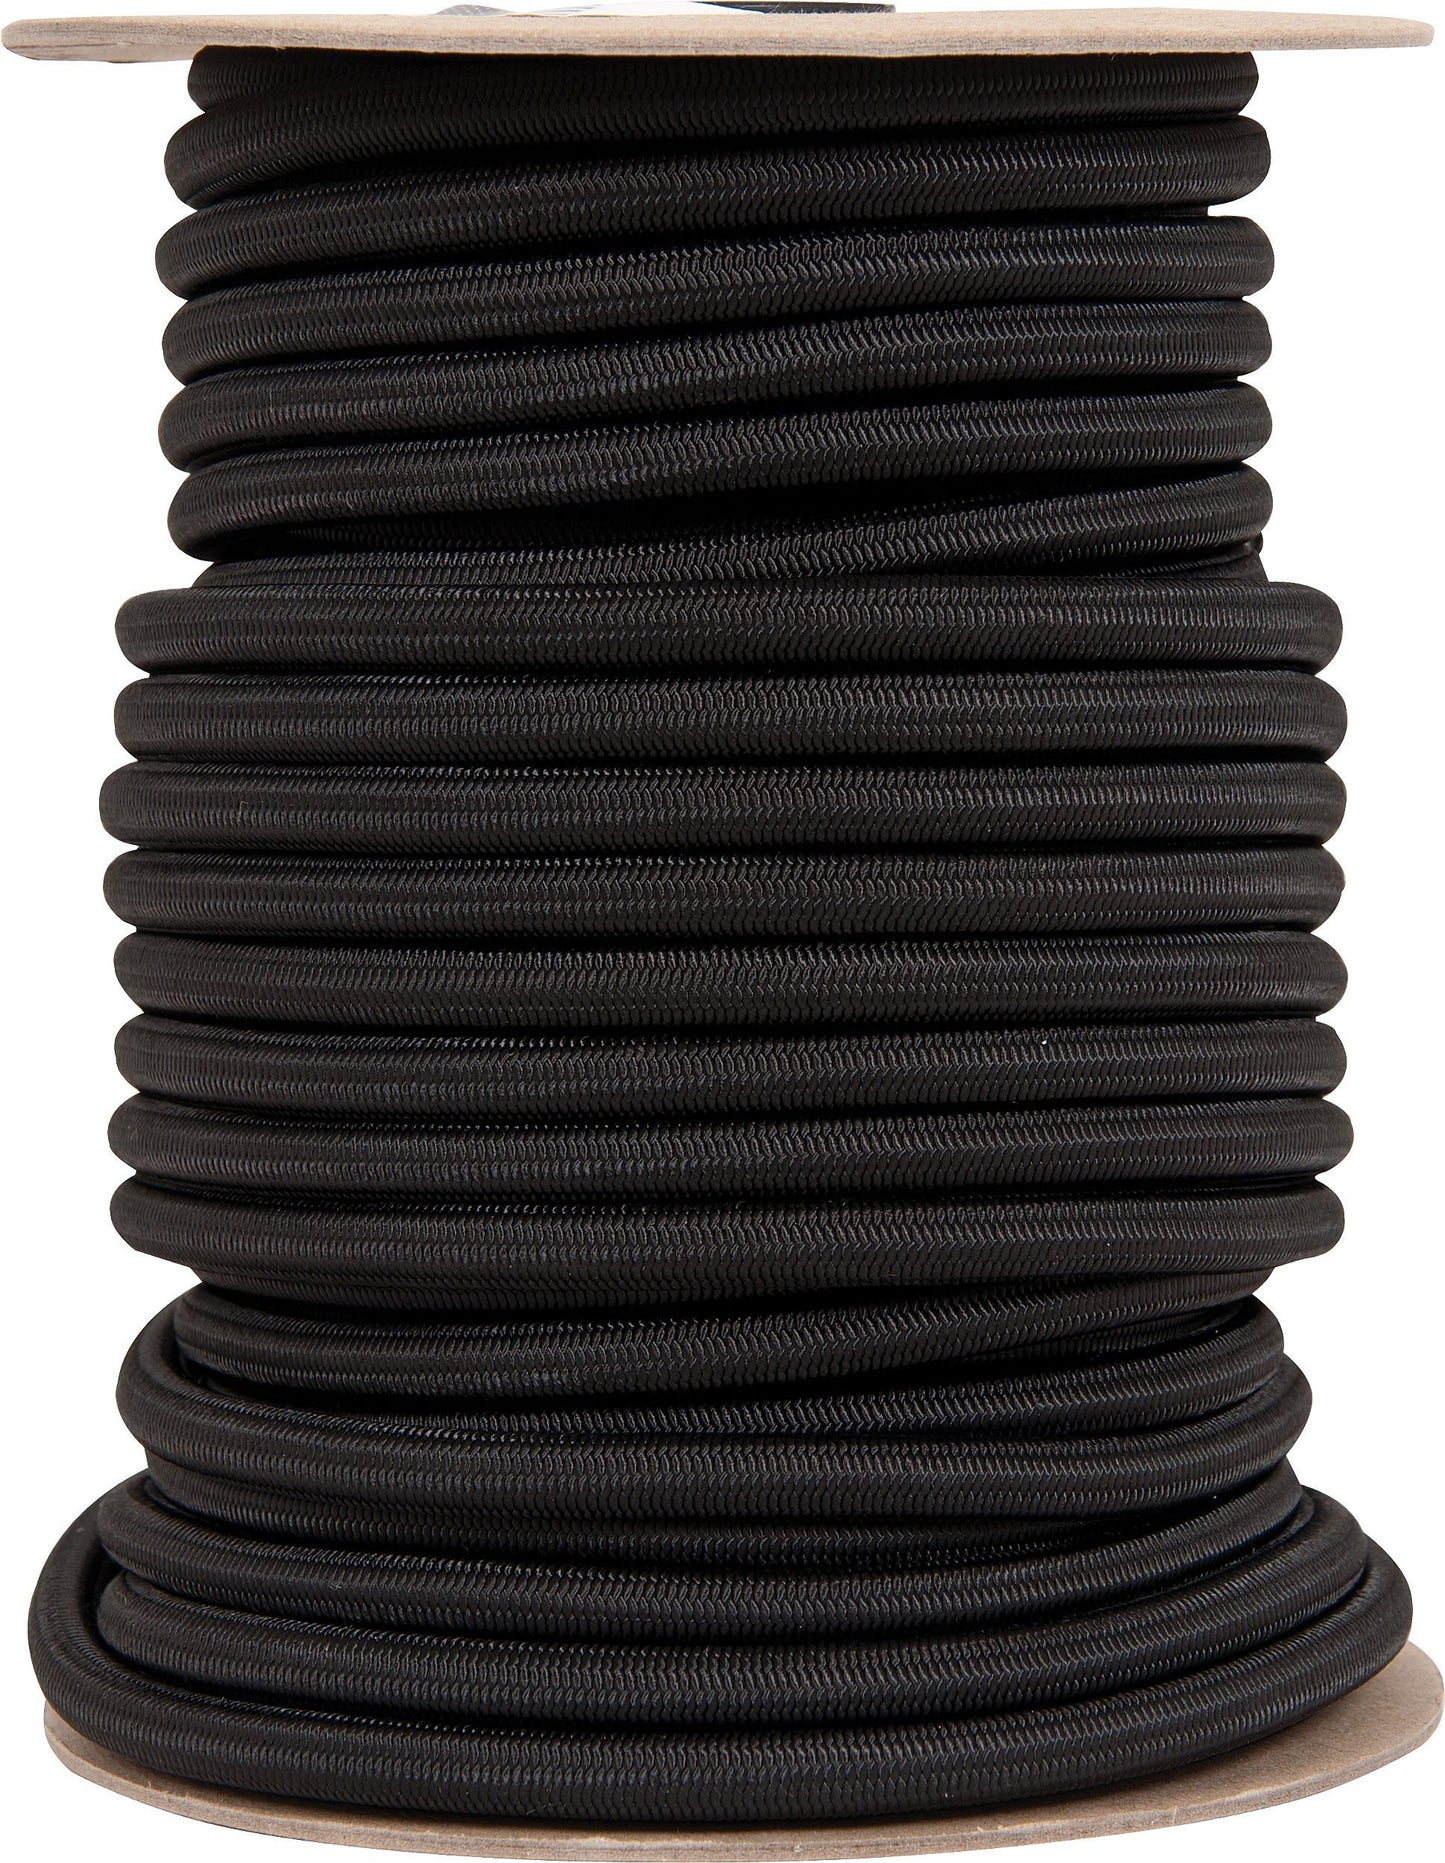 LIBERTY MOUNTAIN SHOCK CORD BY THE SPOOL